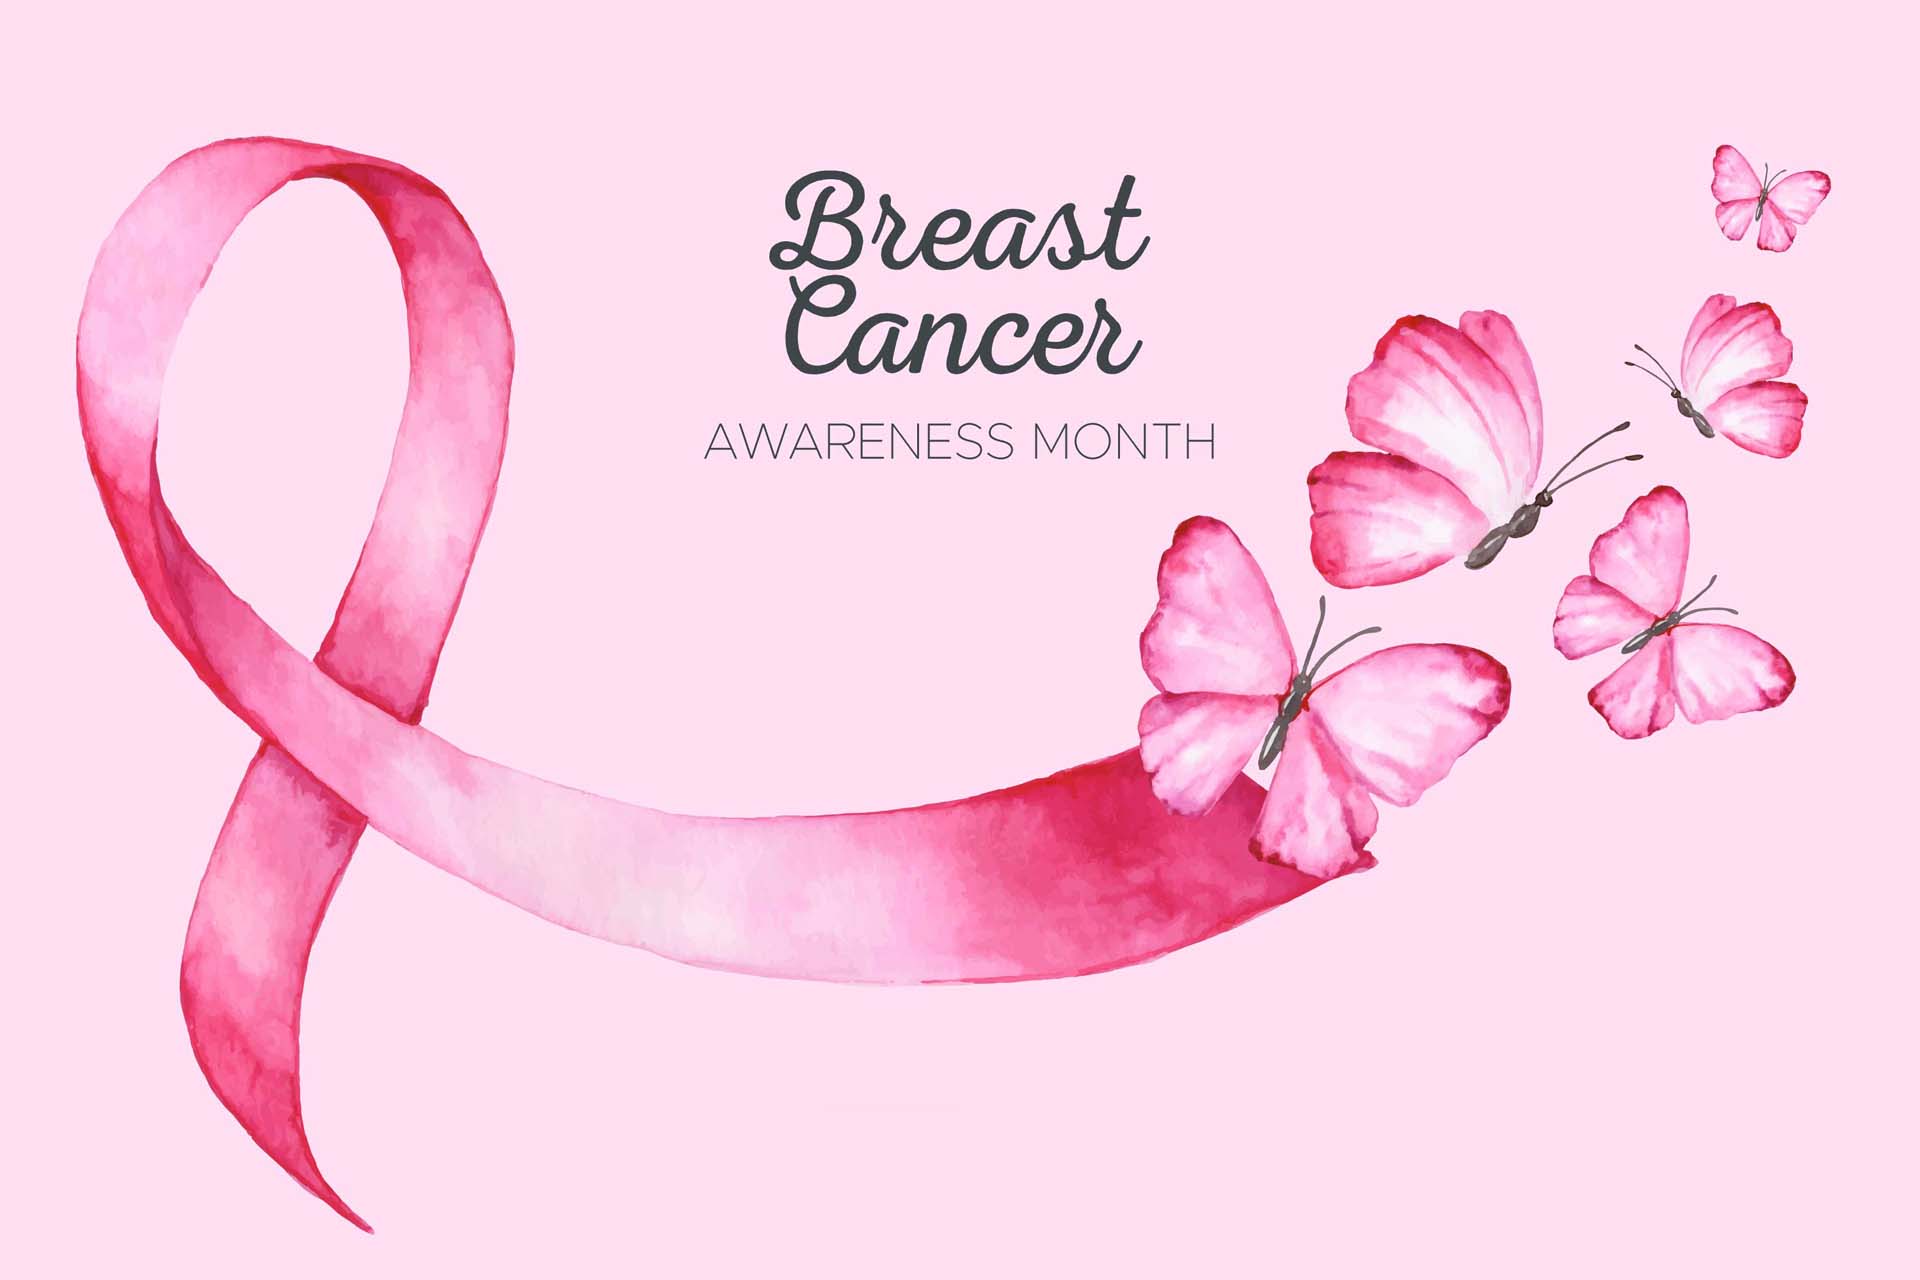 Paint October Pink with Breast Cancer Awareness Month • Eruptr